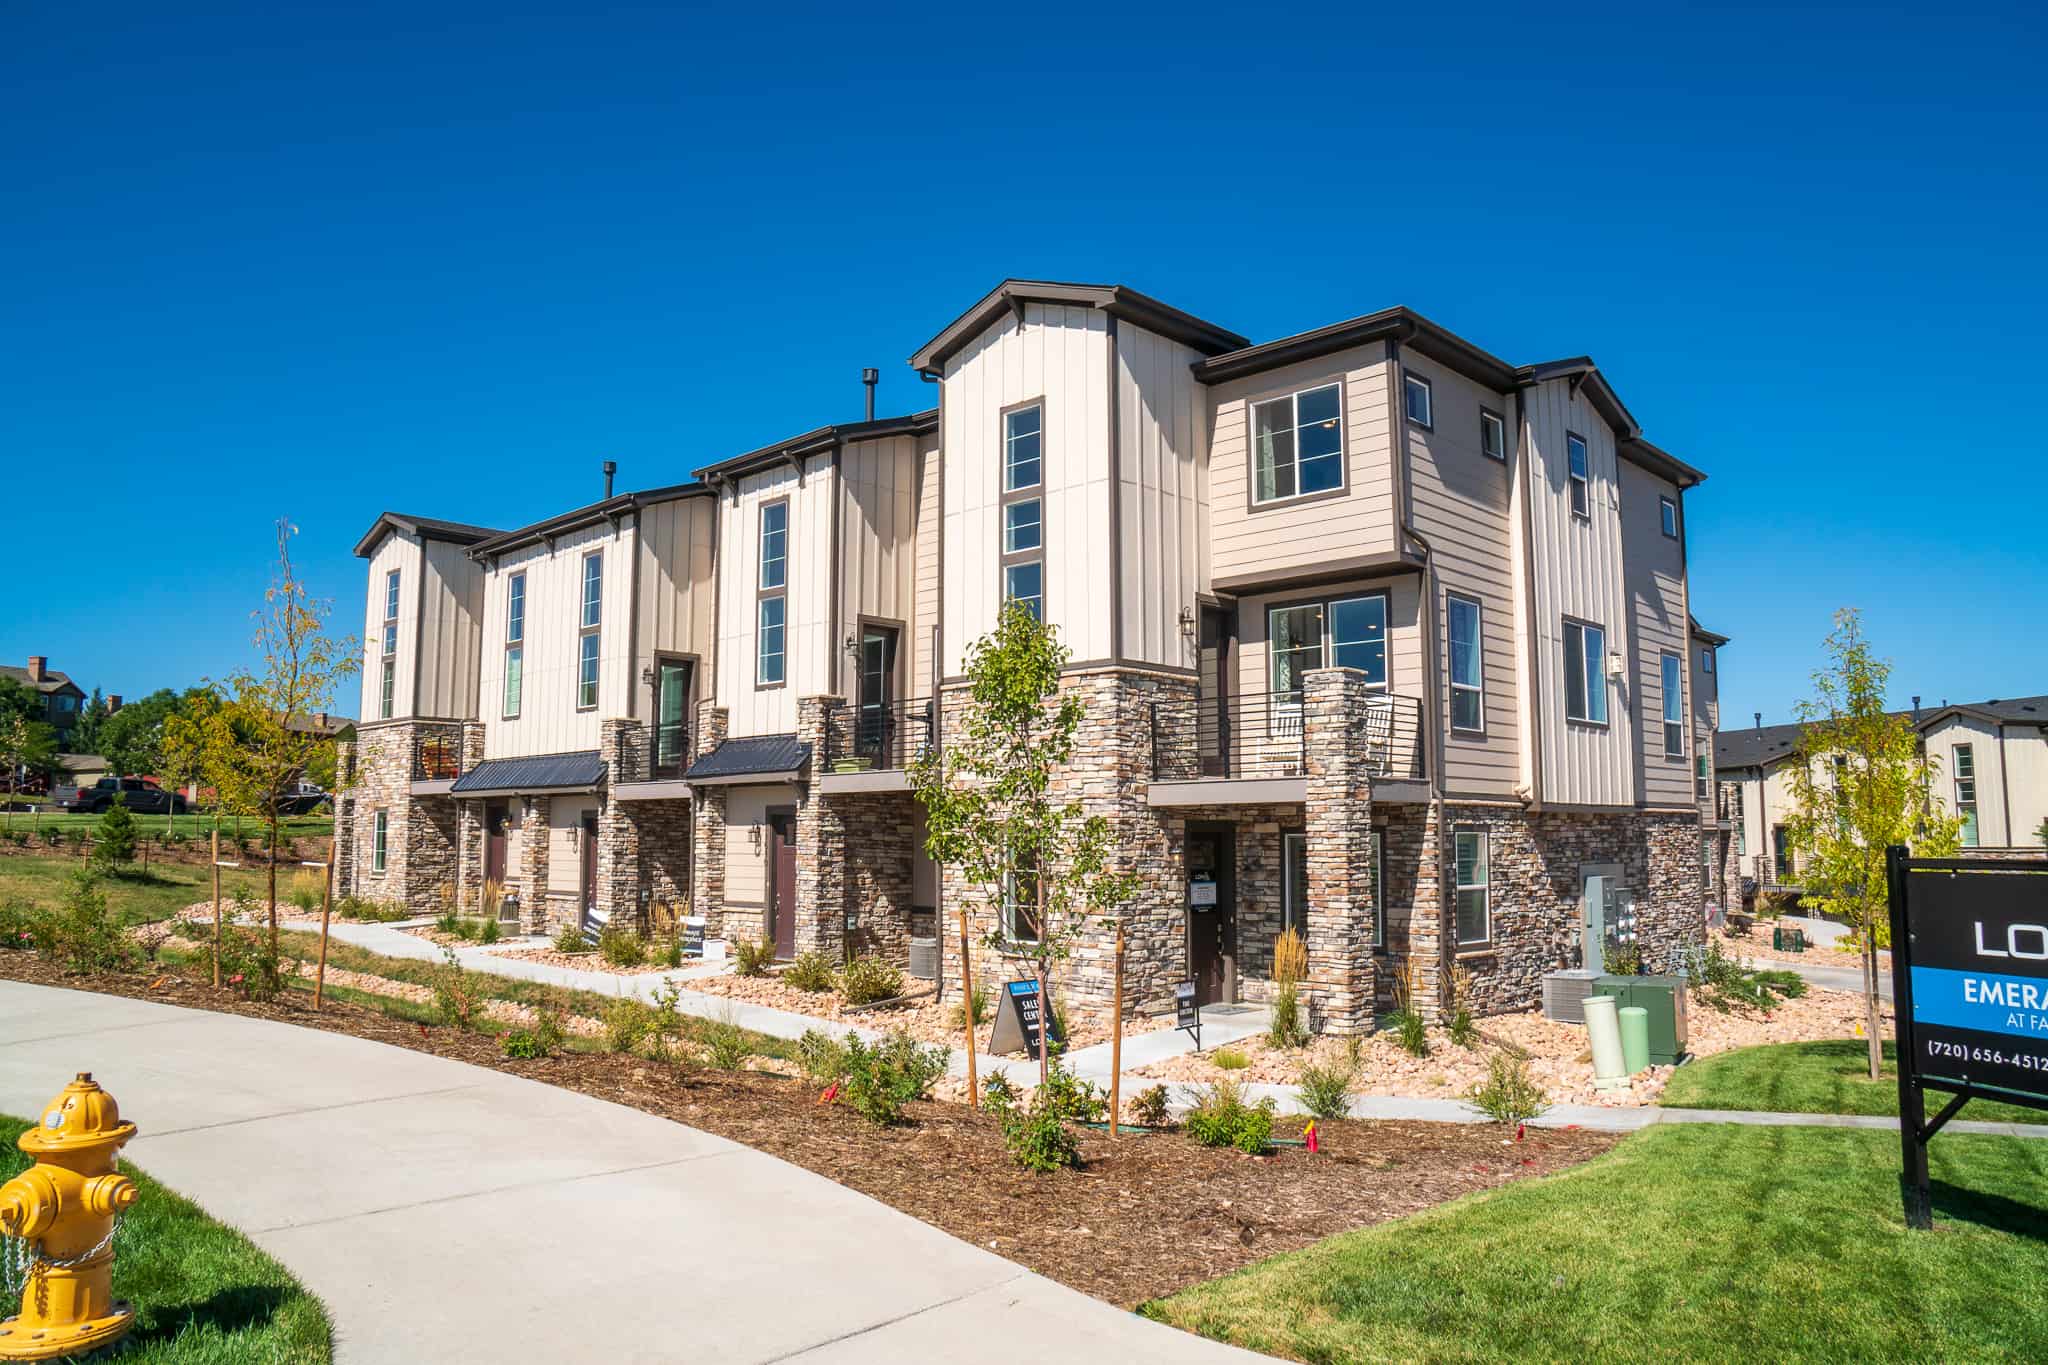 Emerald Ridge Townhomes by Lokal Homes